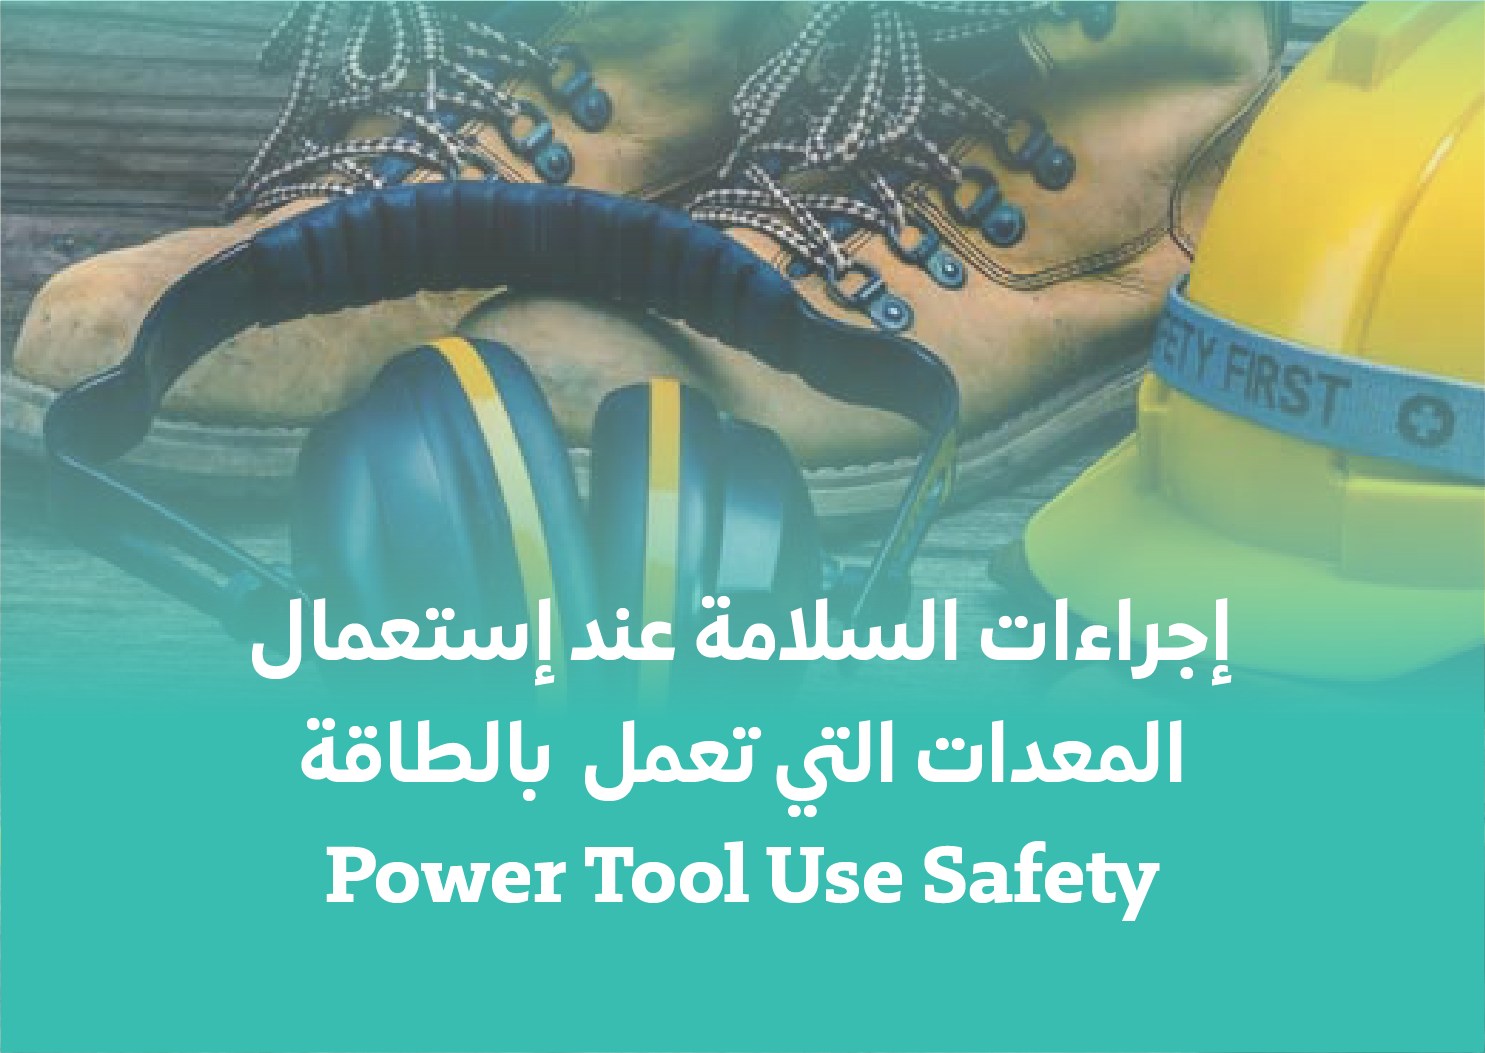 Power Tool Use Safety